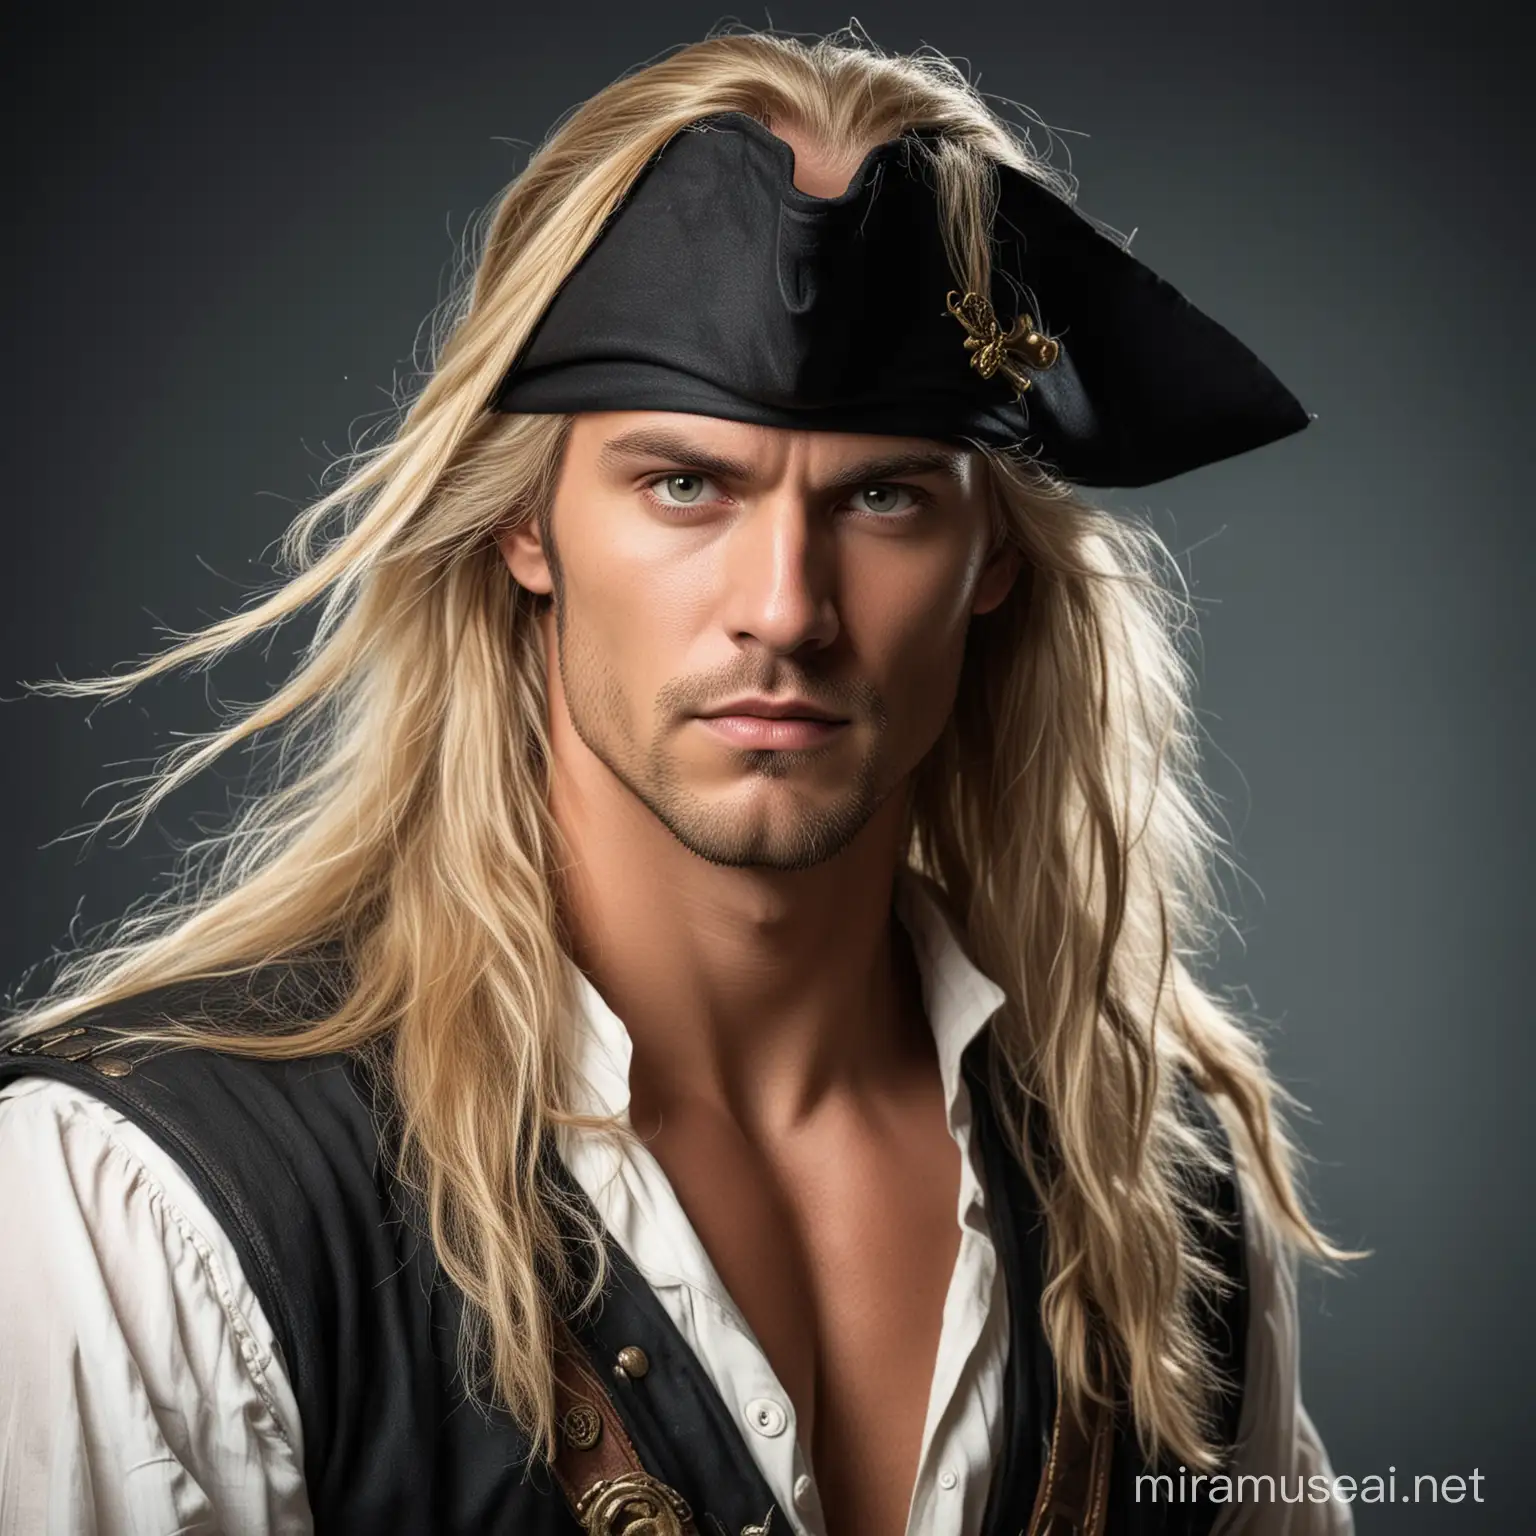 long-haired blonde male pirate, muscular, looking serious